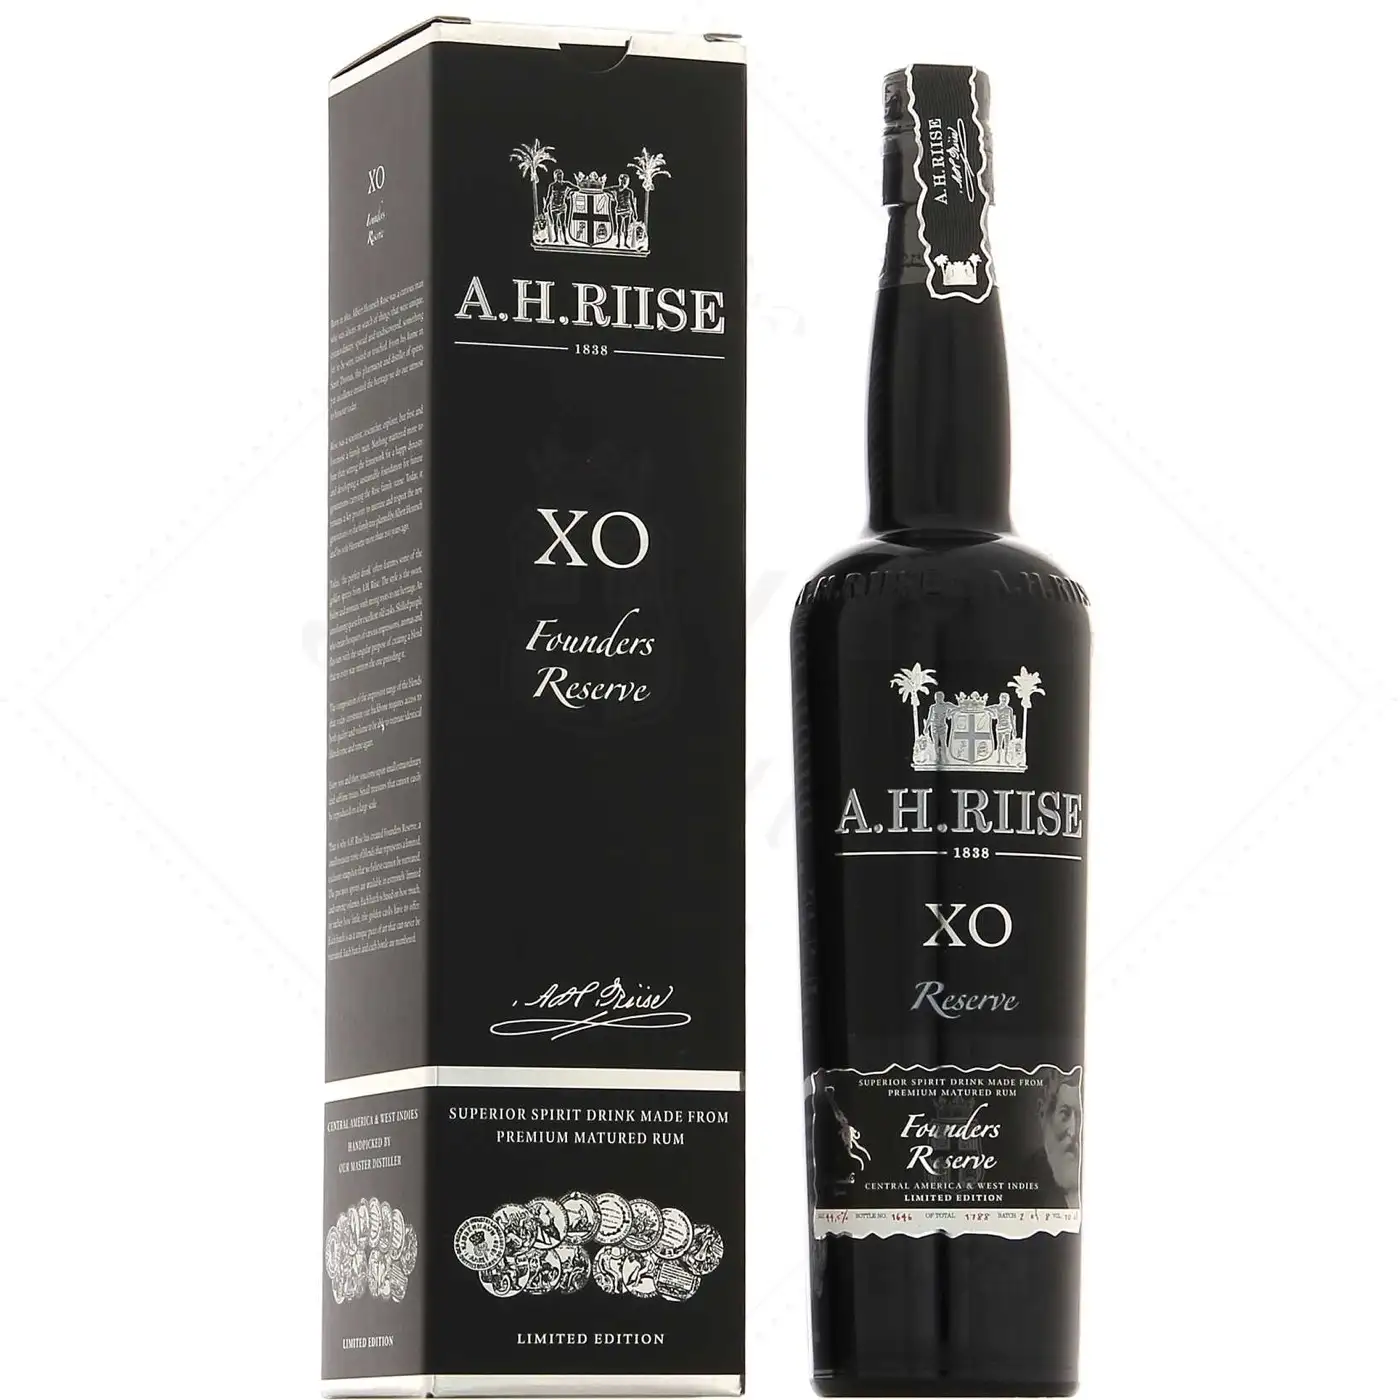 Image of the front of the bottle of the rum XO Founders Reserve 1st Edition